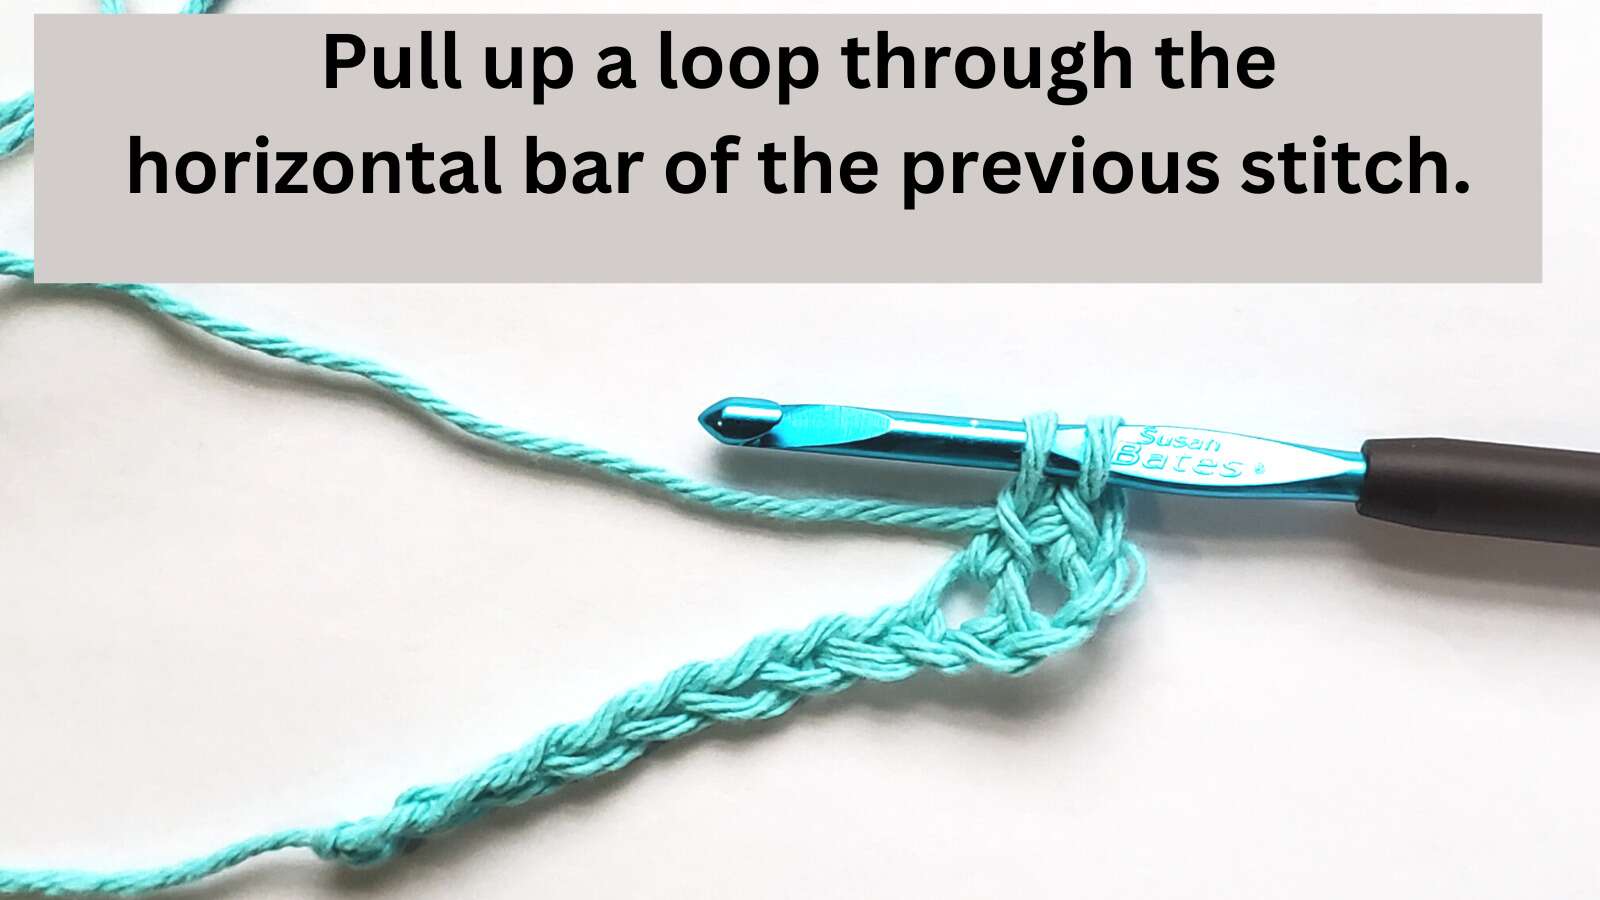 Loop pulled up through the horizontal bar of the previous stitch